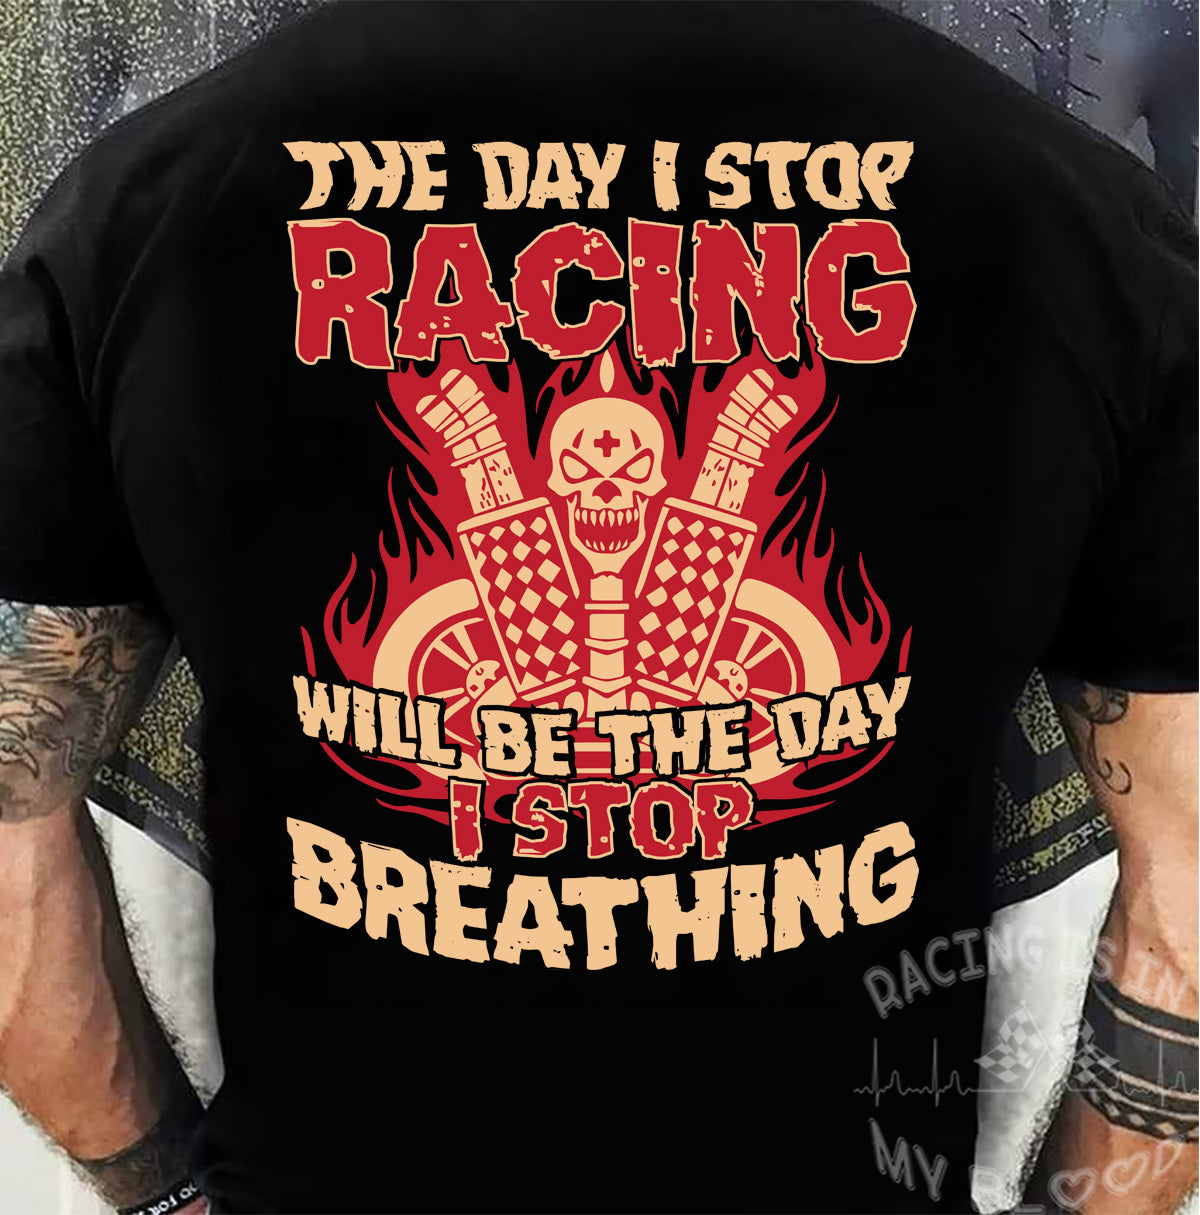 The Day I Stop Racing Will Be The Day I Stop Breathing T-Shirts!